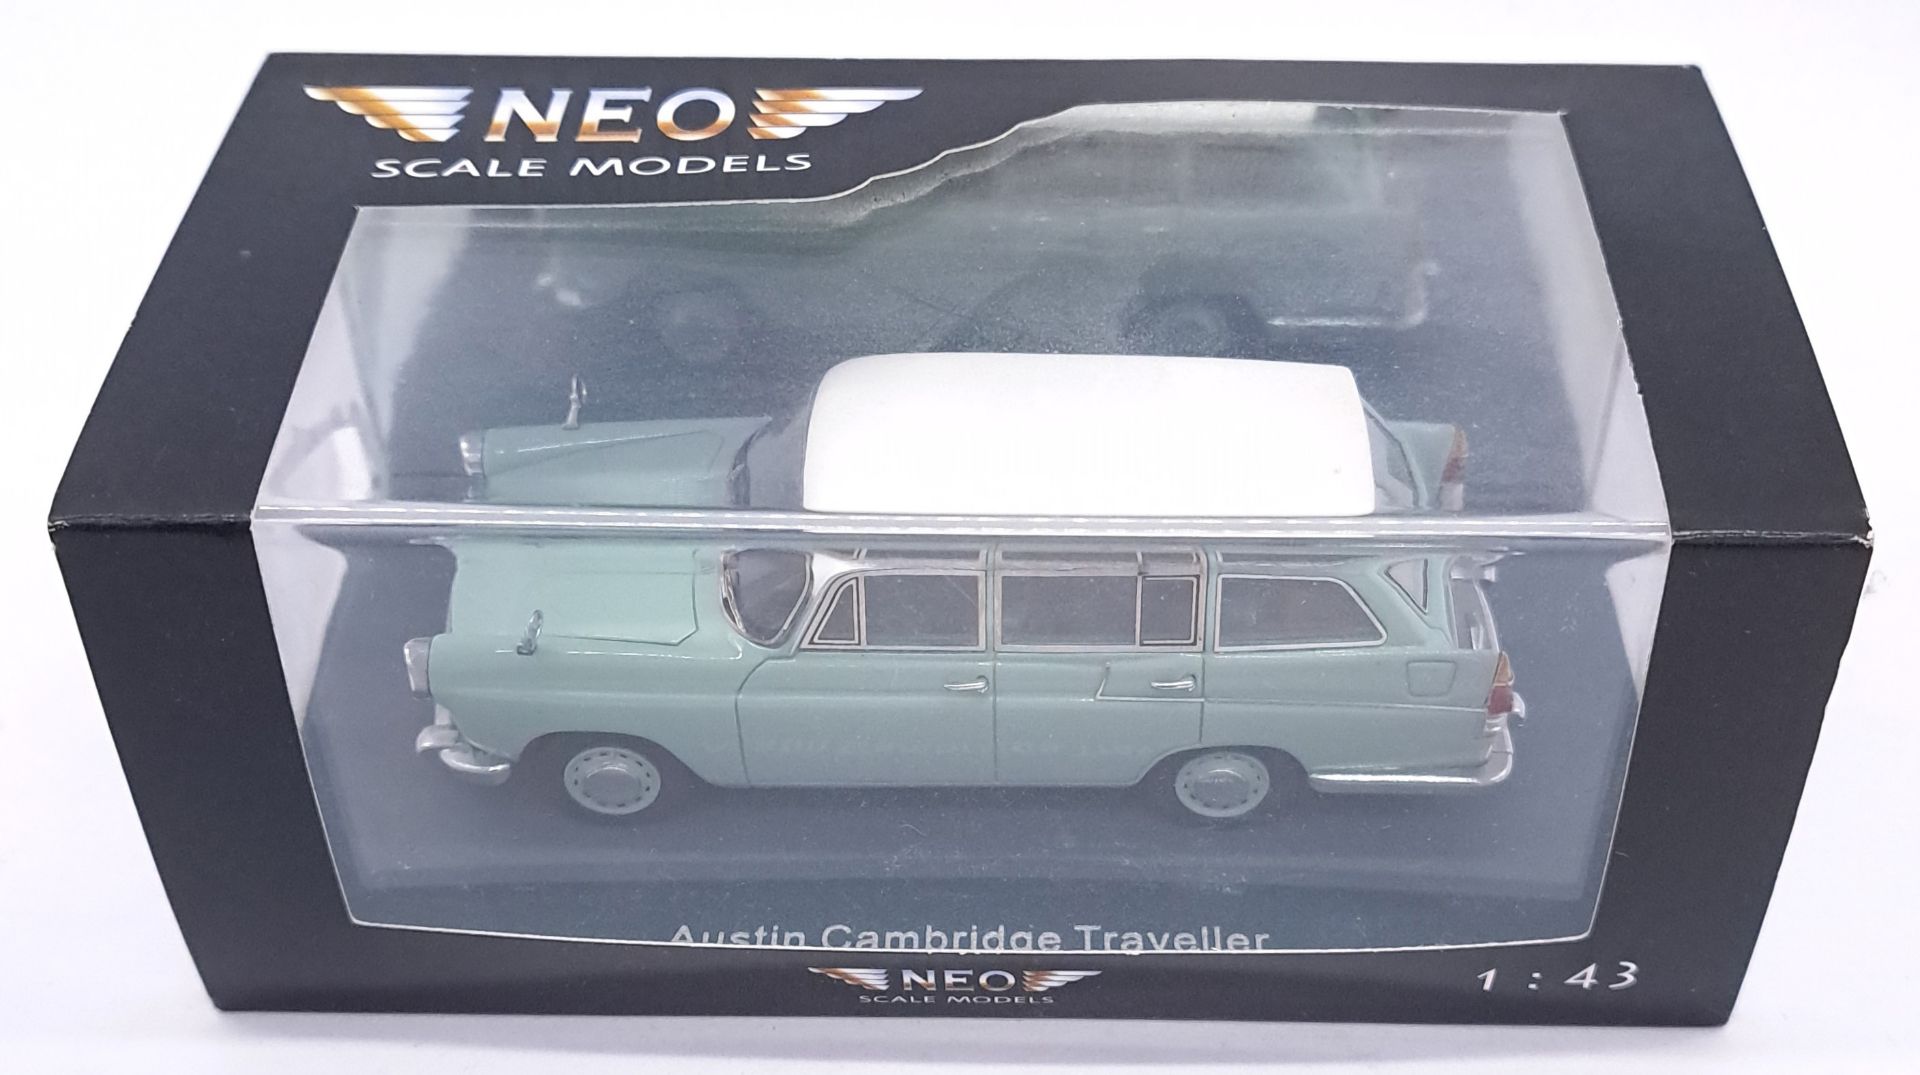 NEO Scale Models, a boxed 1:43 scale group - Bild 2 aus 4